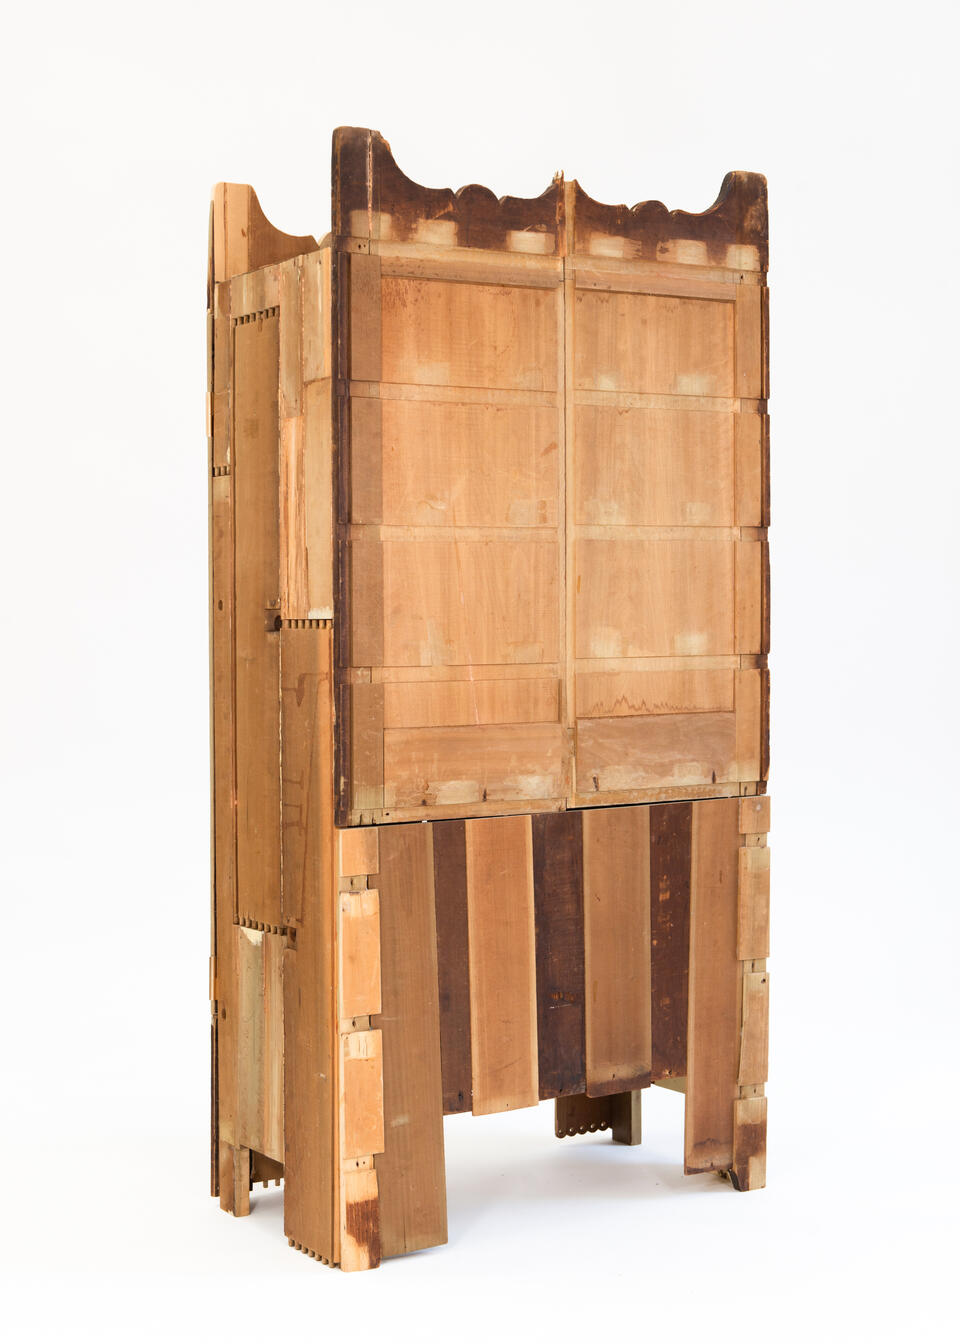 A Cabinet made from the deconstructed materials of a found dresser in warm yellow.